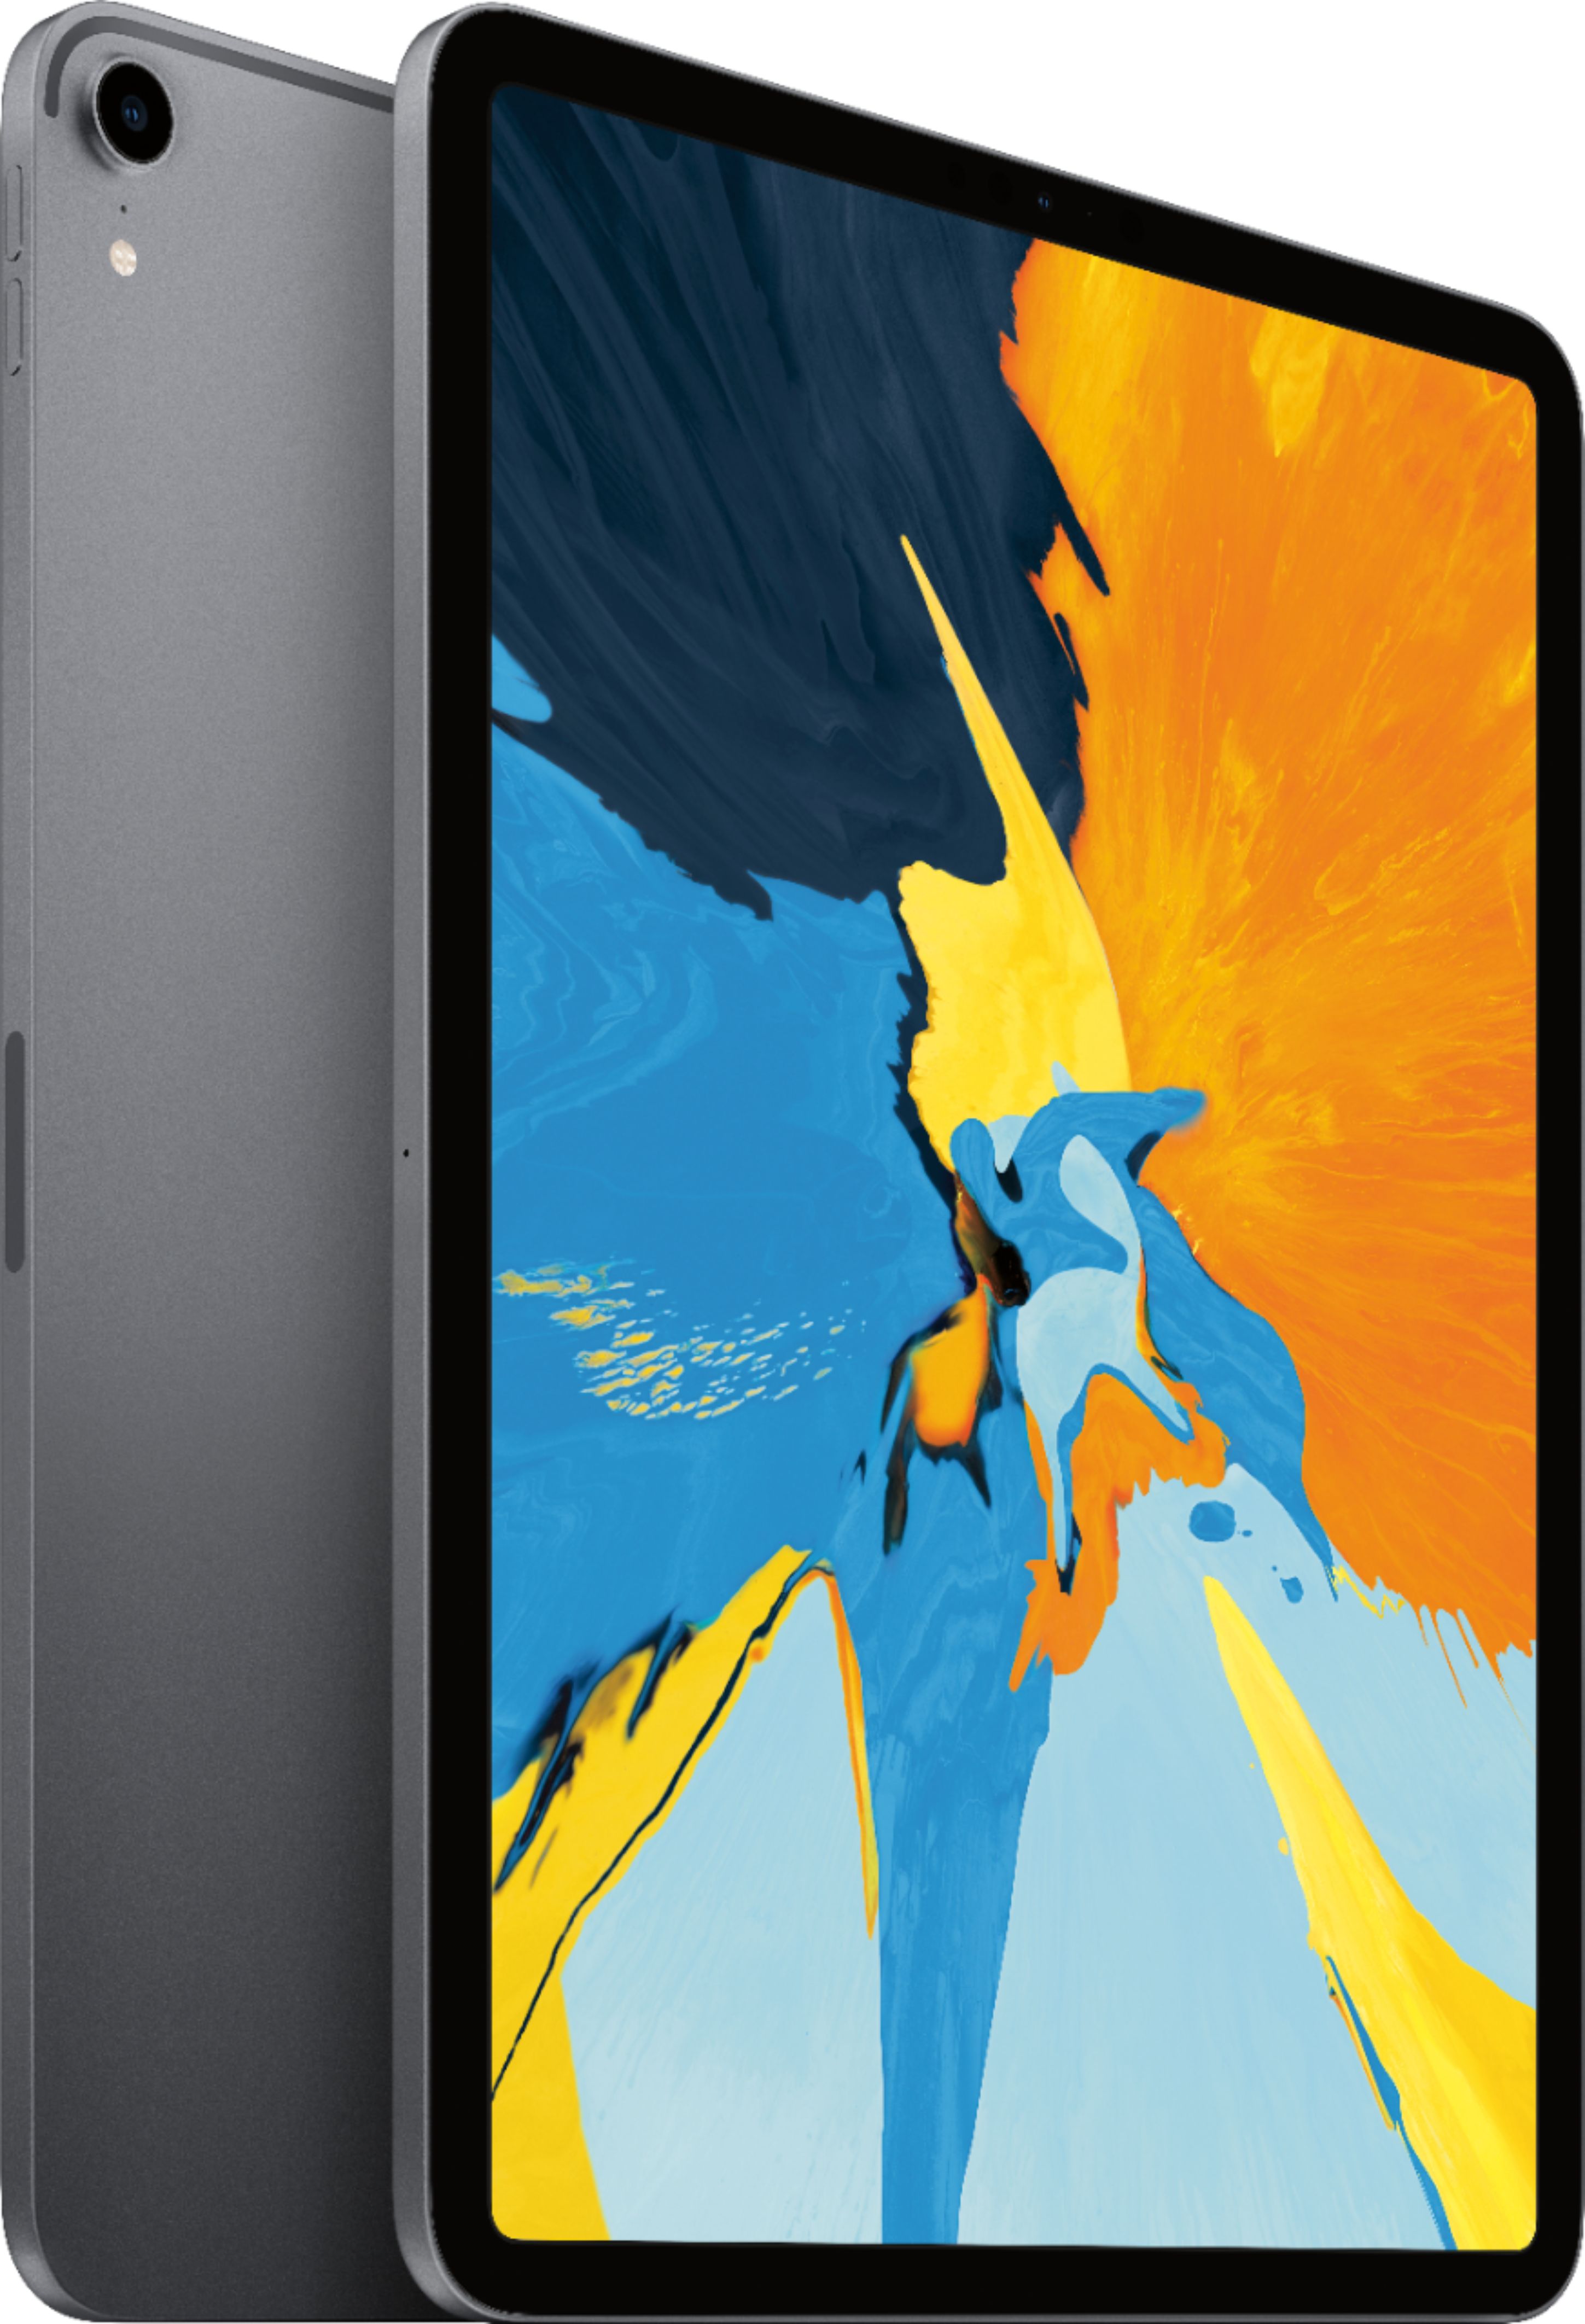 Angle View: Apple - Geek Squad Certified Refurbished 11-Inch iPad Pro (Latest Model) with Wi-Fi - 256GB - Space Gray